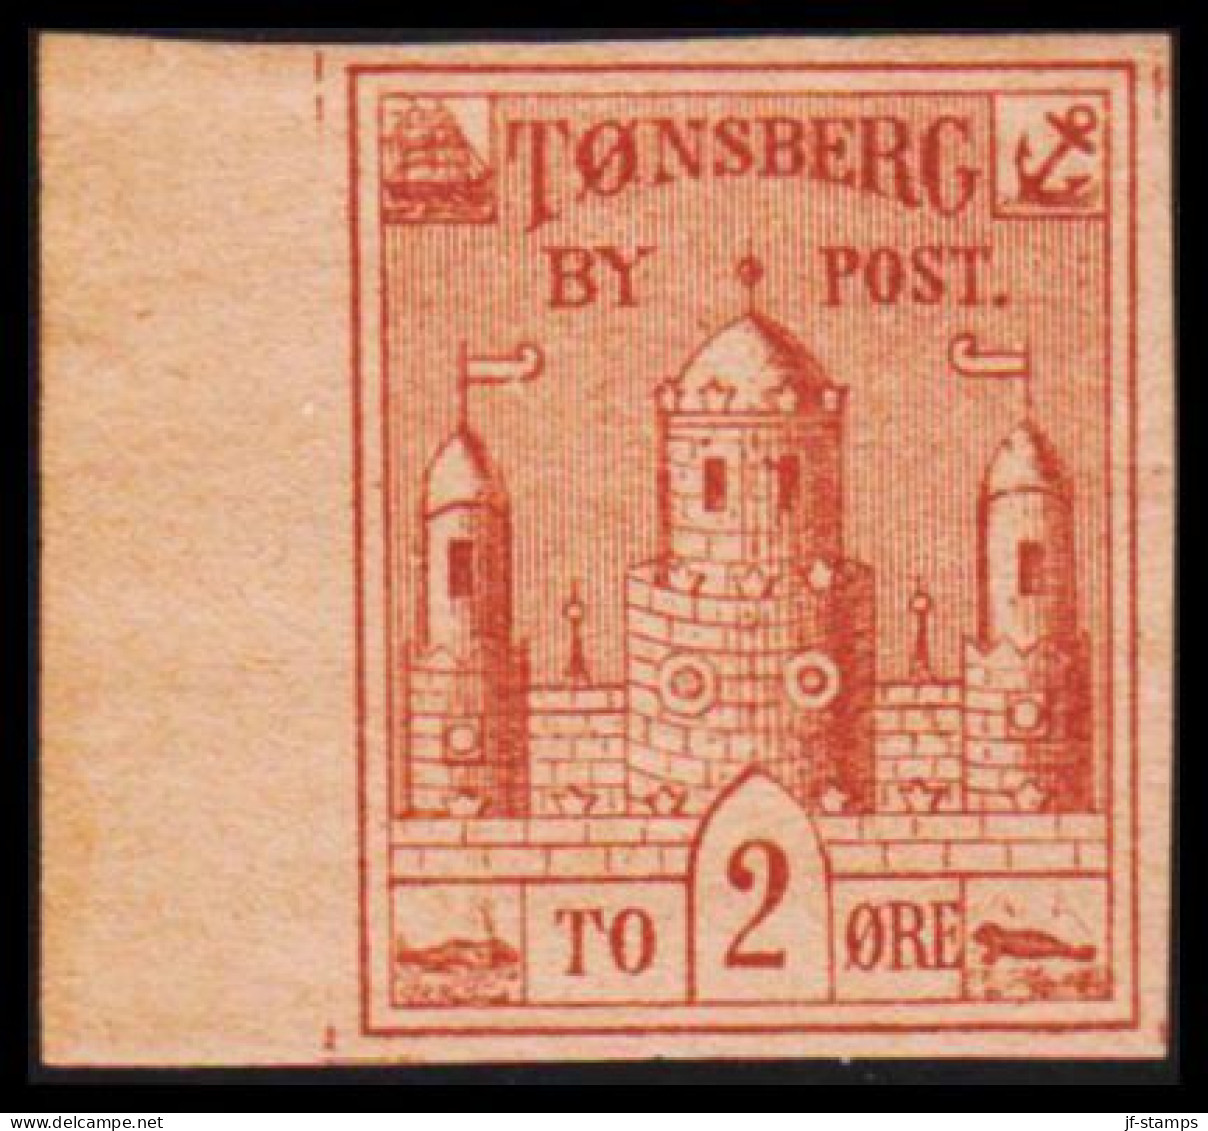 1884. NORGE. TØNSBERG BY POST TO 2 ØRE With Left Sheet Margin. No Gum. - JF531635 - Local Post Stamps